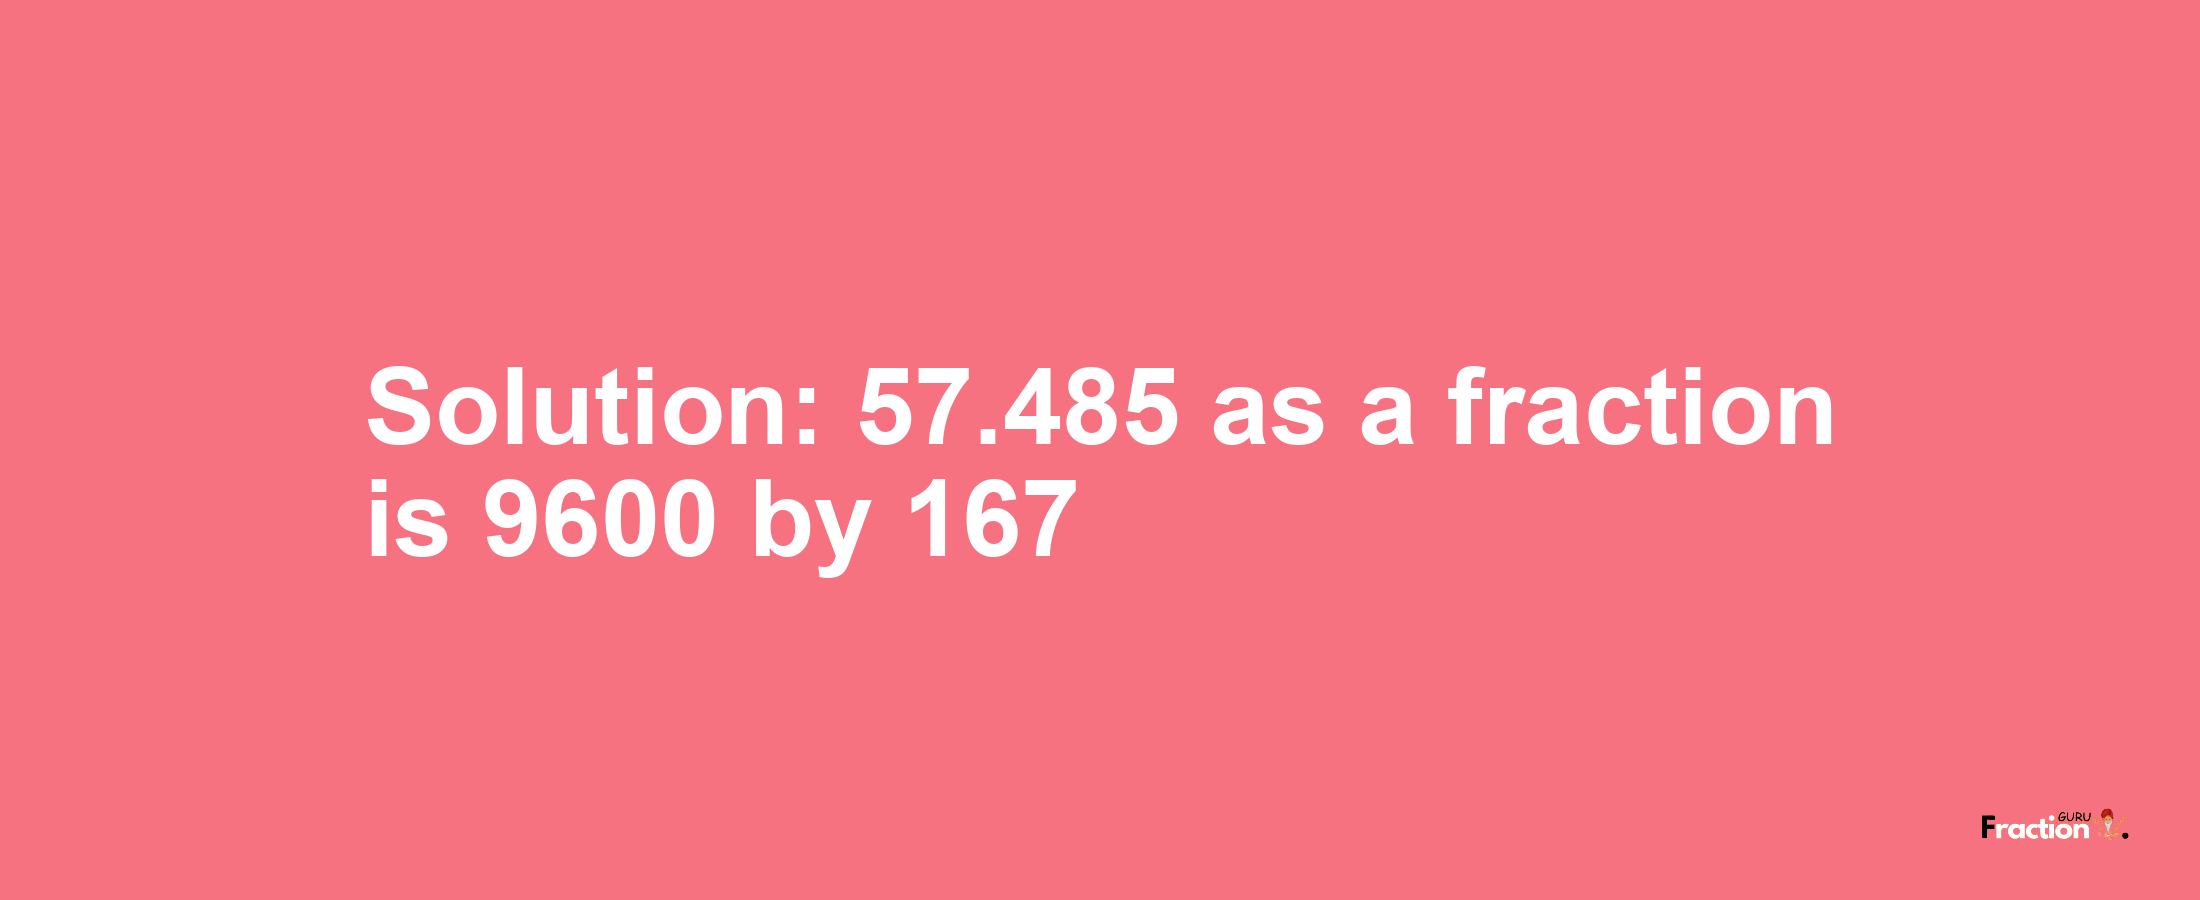 Solution:57.485 as a fraction is 9600/167